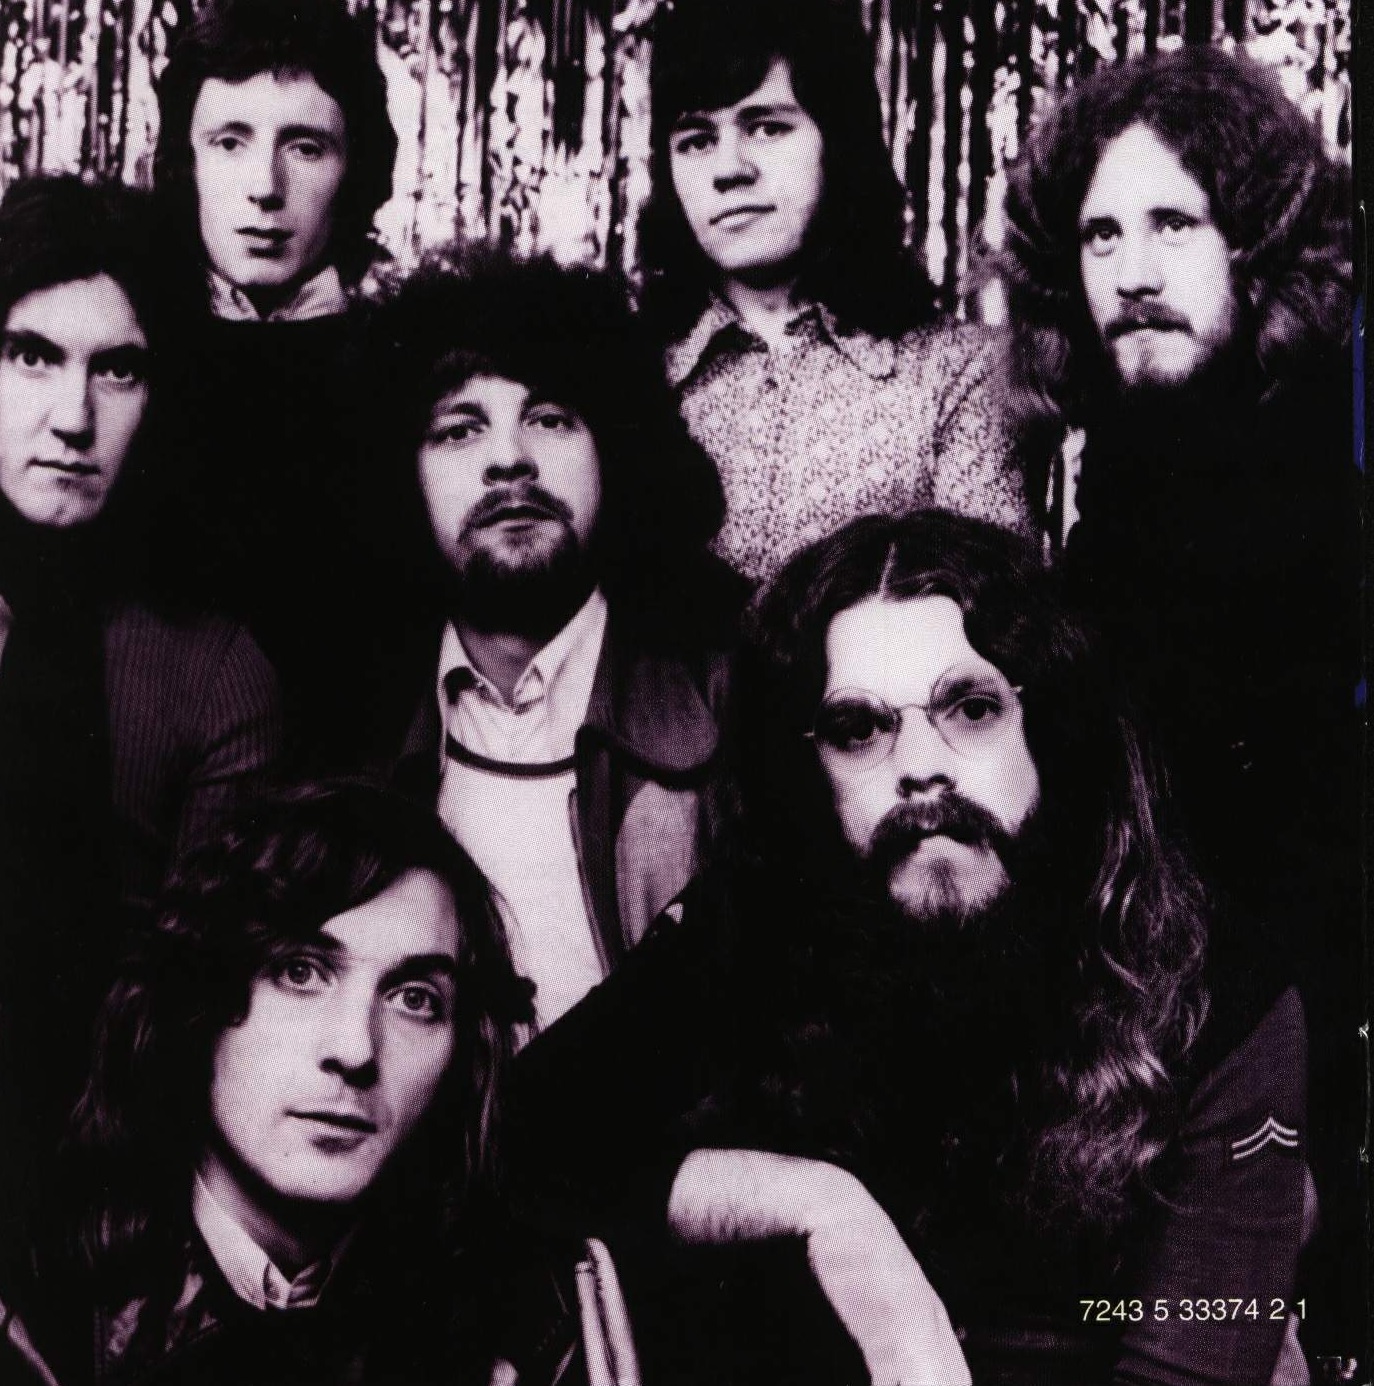 the electric light orchestra